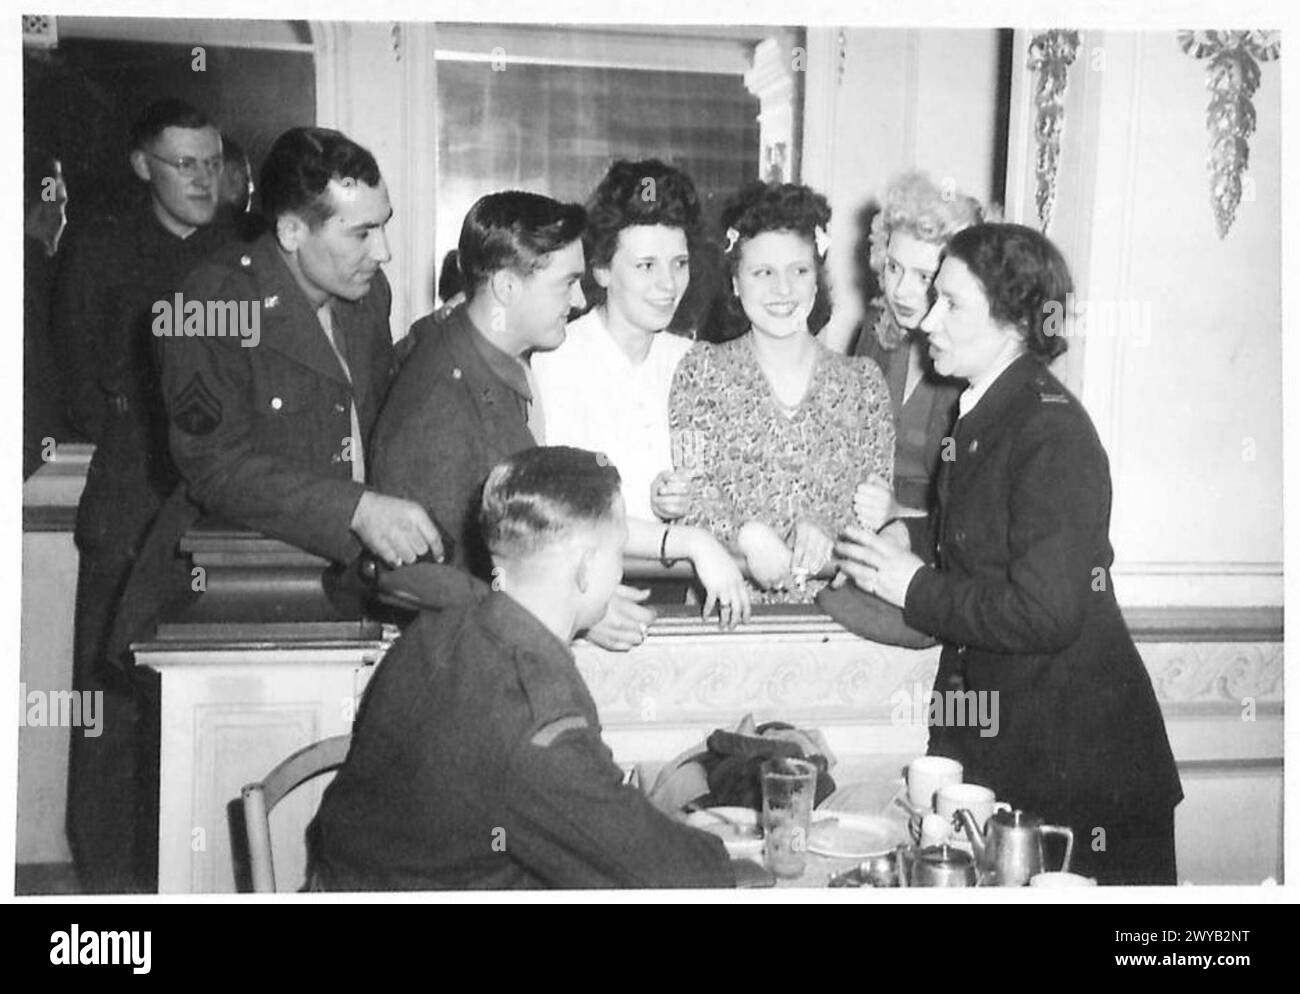 THE '21' DANCE CLUB, BRUSSELS - Original wartime caption: Mrs Robinson, one of the Welfare workers, smooths out a language difficulty between three Belgian girls and two Americans. Americans are Cpl C. Cook of Mississipi and Cpl. S. Gomore of New York. Mrs Robinson had an exciting story to tell them she is married to an Englishman (in Surrey) and when the Germans marched into Belgium in 1940, she stayed behind to do Red Cross work. For helping British men to escape she was given hard labour for eight years by the Germans, of which she served 20 months. The Germans executed the men with whom sh Stock Photo